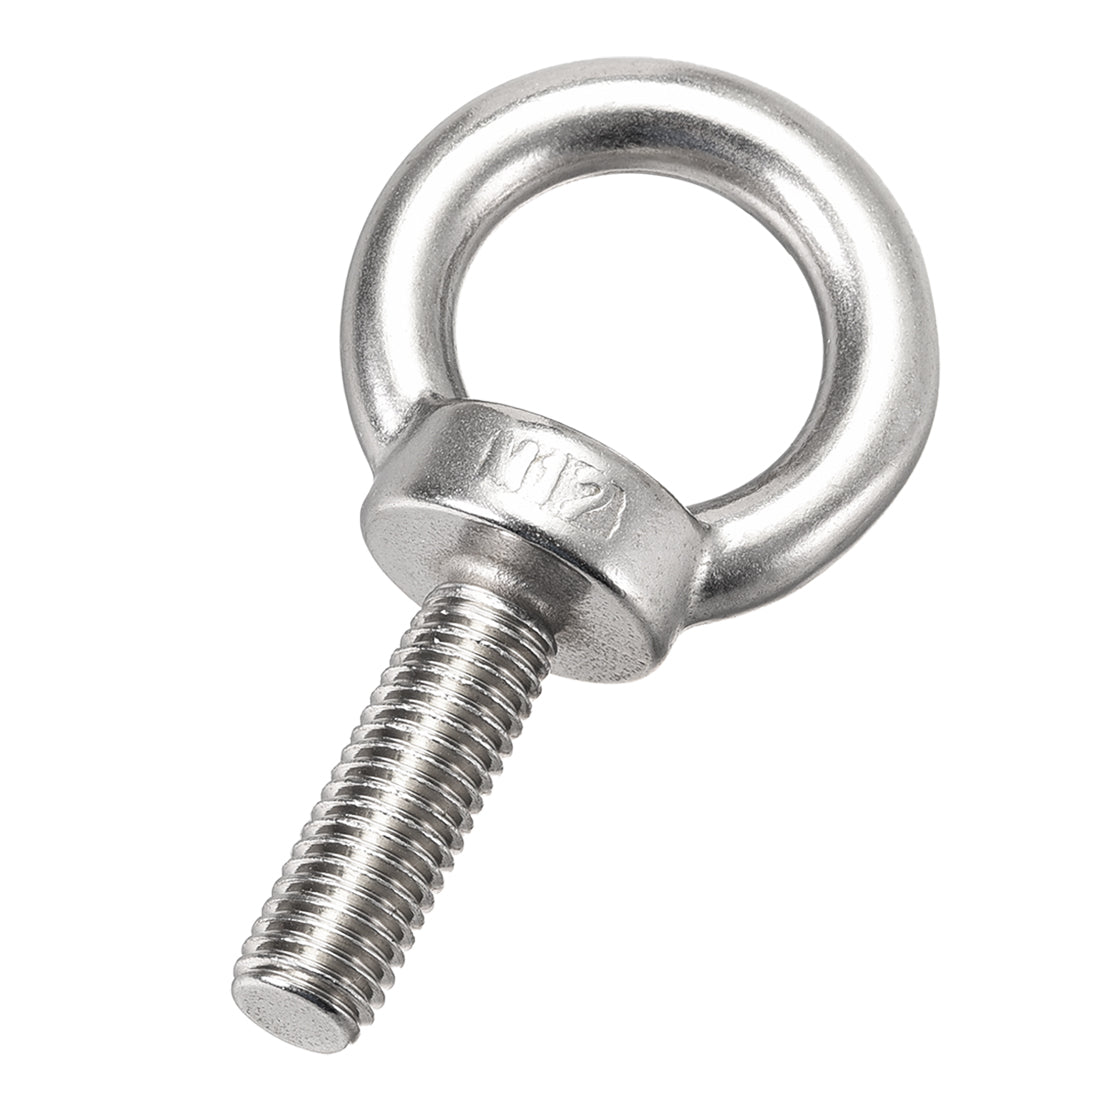 uxcell Uxcell 2 Pcs M12x40mm Thread 30mm Inside Dia 47mm Outside Dia 304 Stainless Steel Lifting Eye Bolt